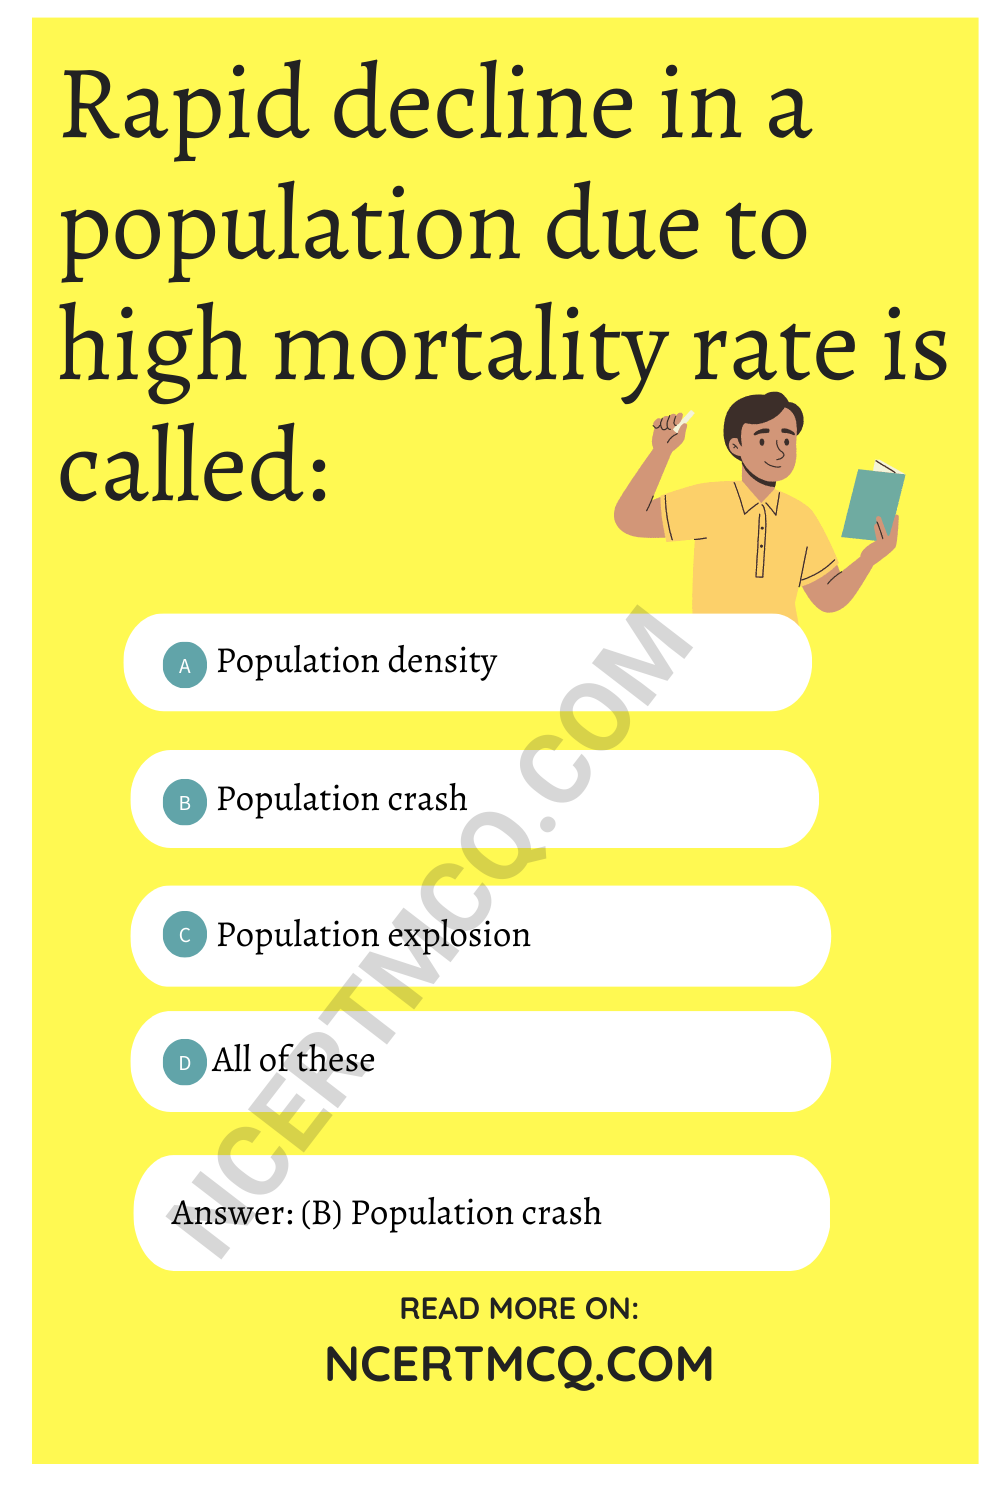 Rapid decline in a population due to high mortality rate is called: